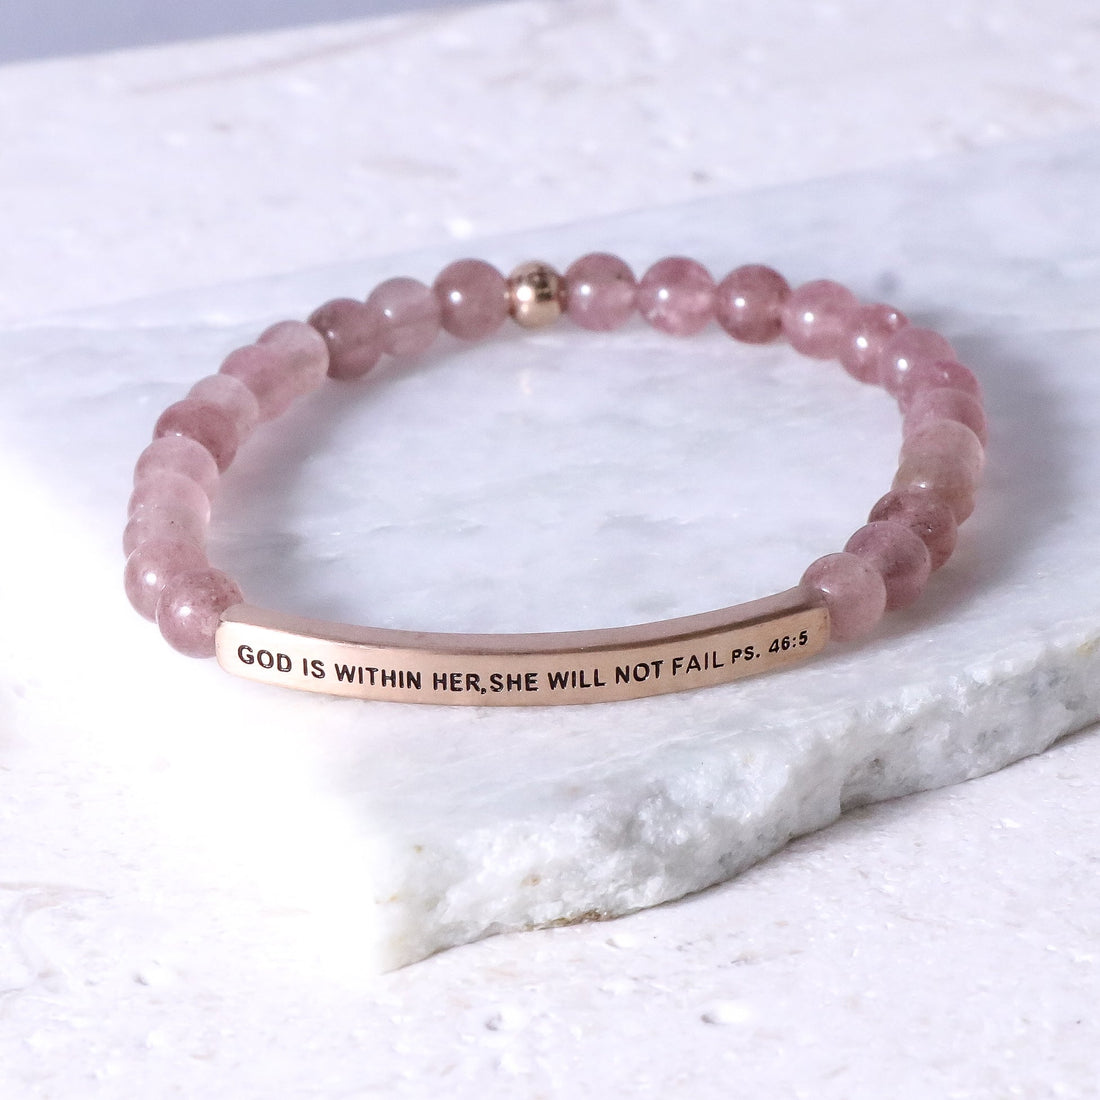 GOD IS WITHIN HER SHE WILL NOT FAIL - Psalms 46:5 - Kids Collection - Inspiration Co.